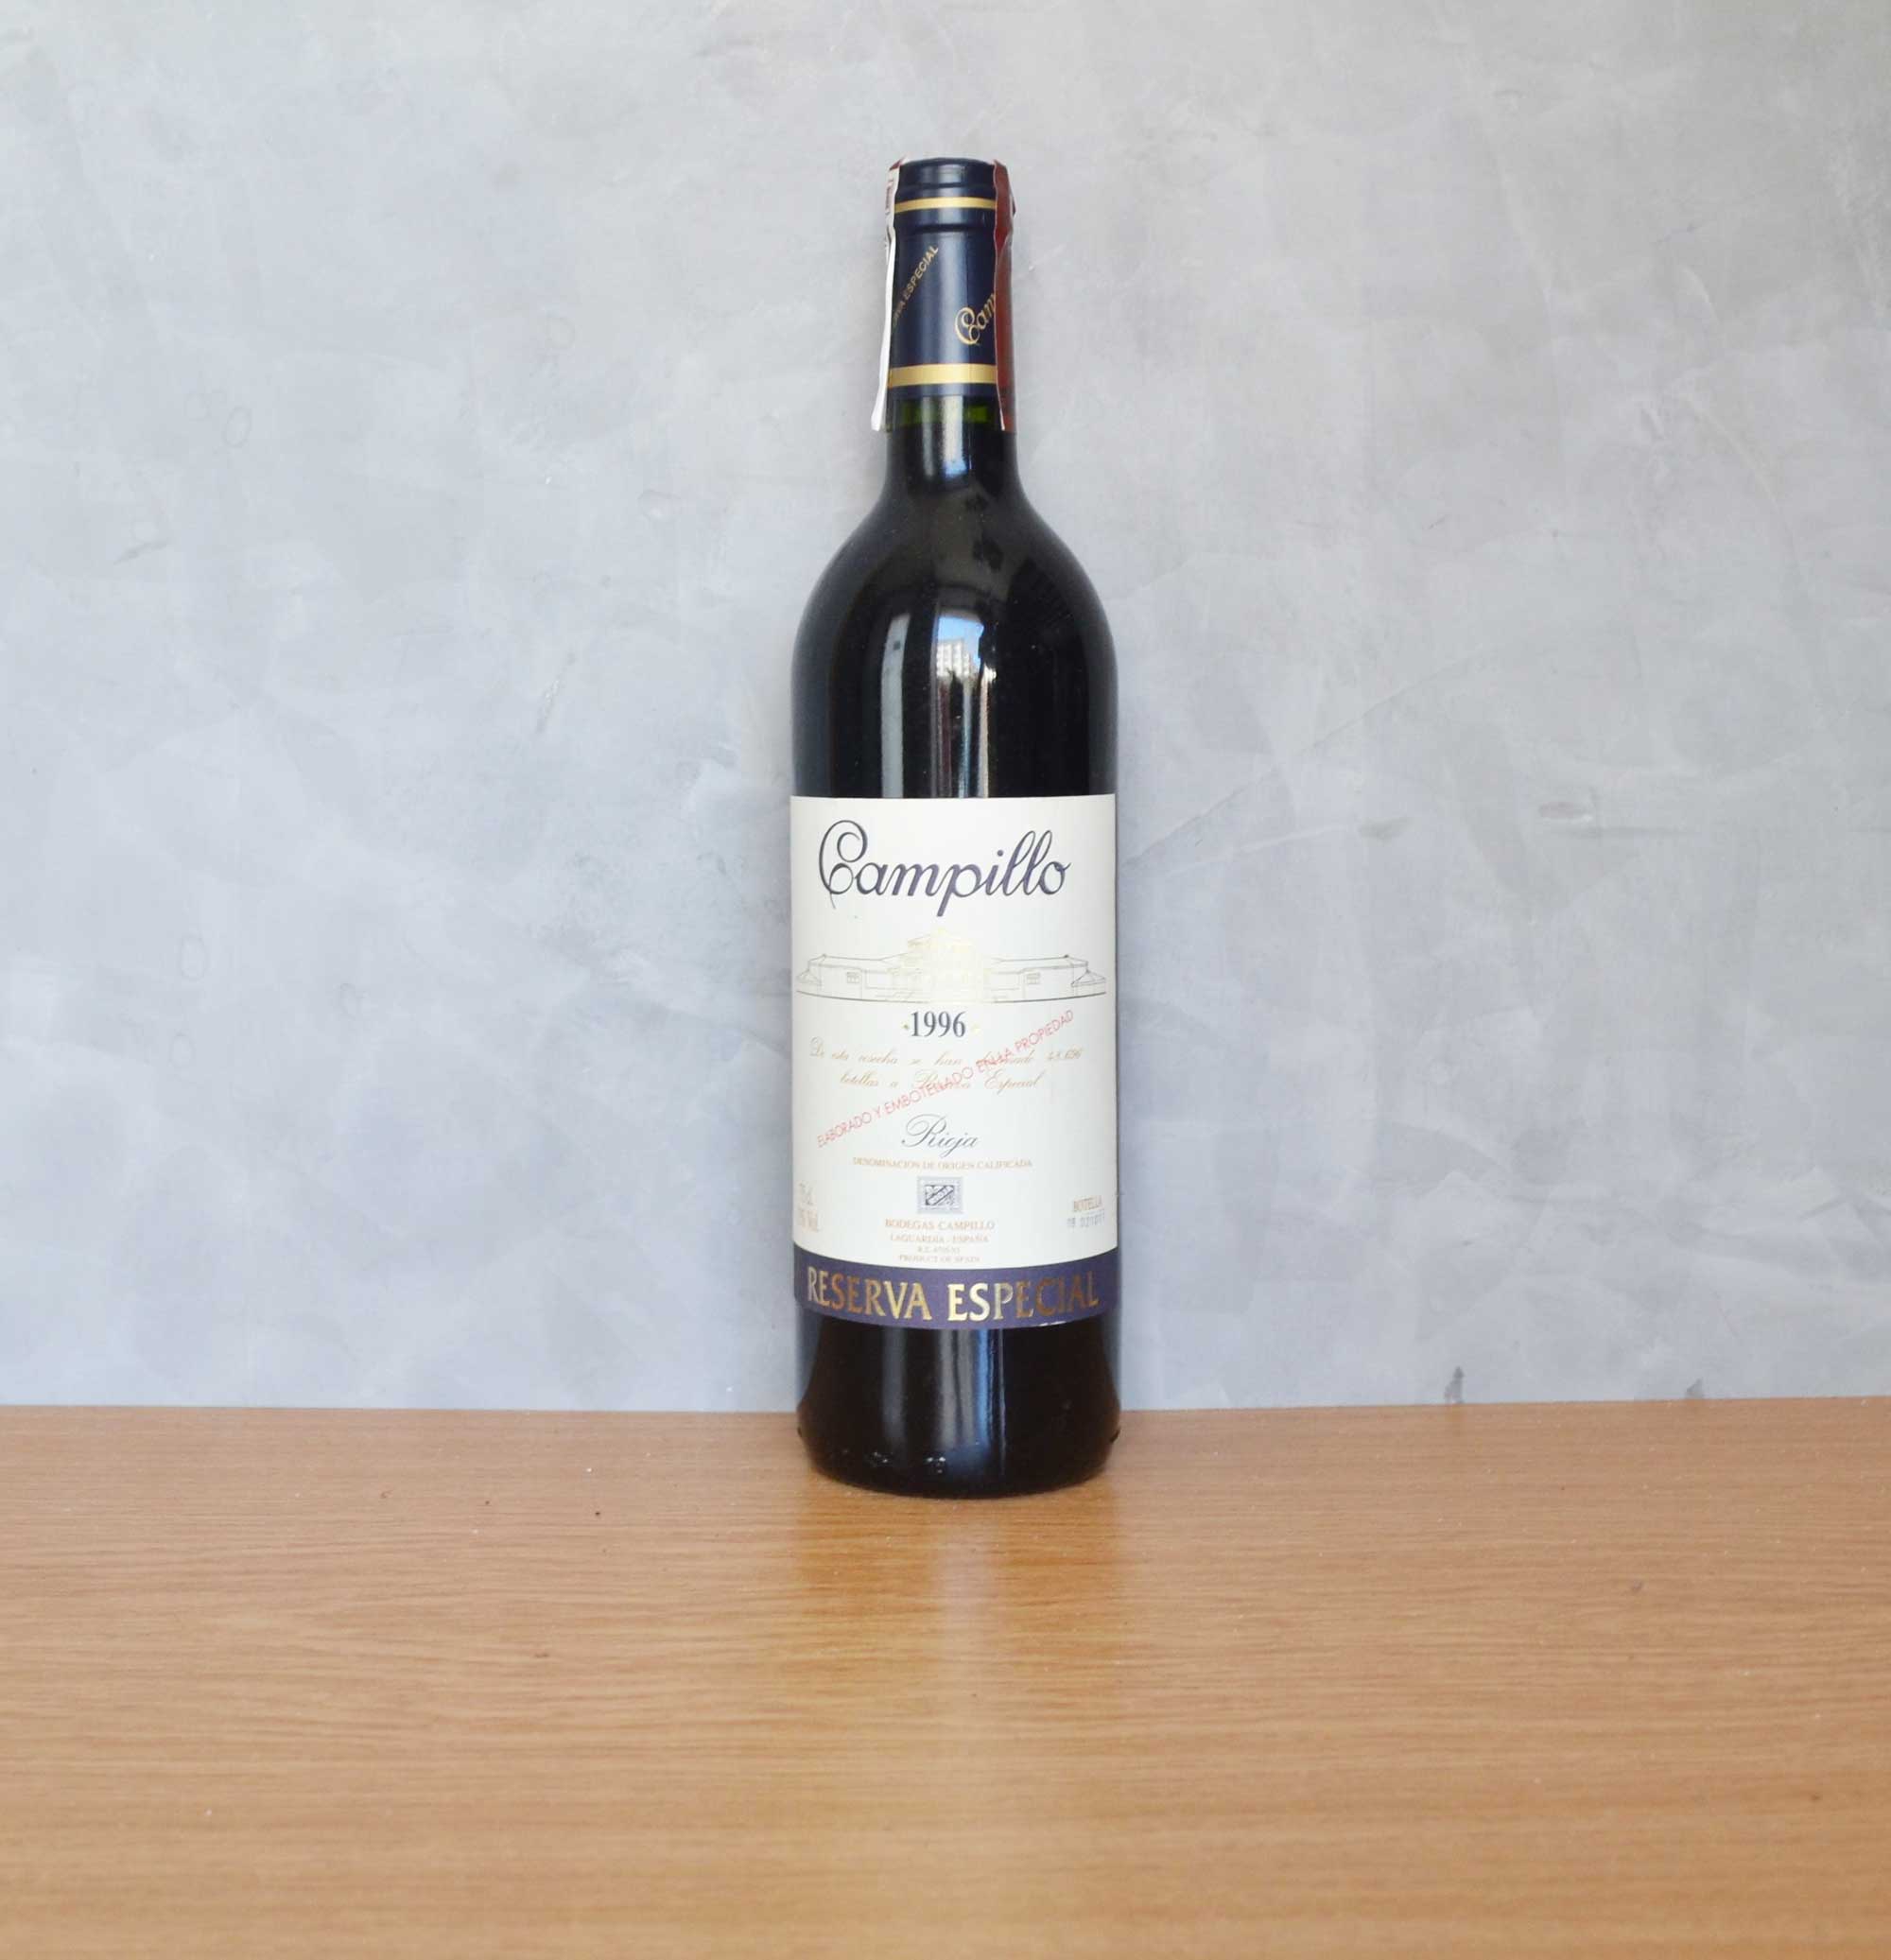 Campillo special reserve 1996